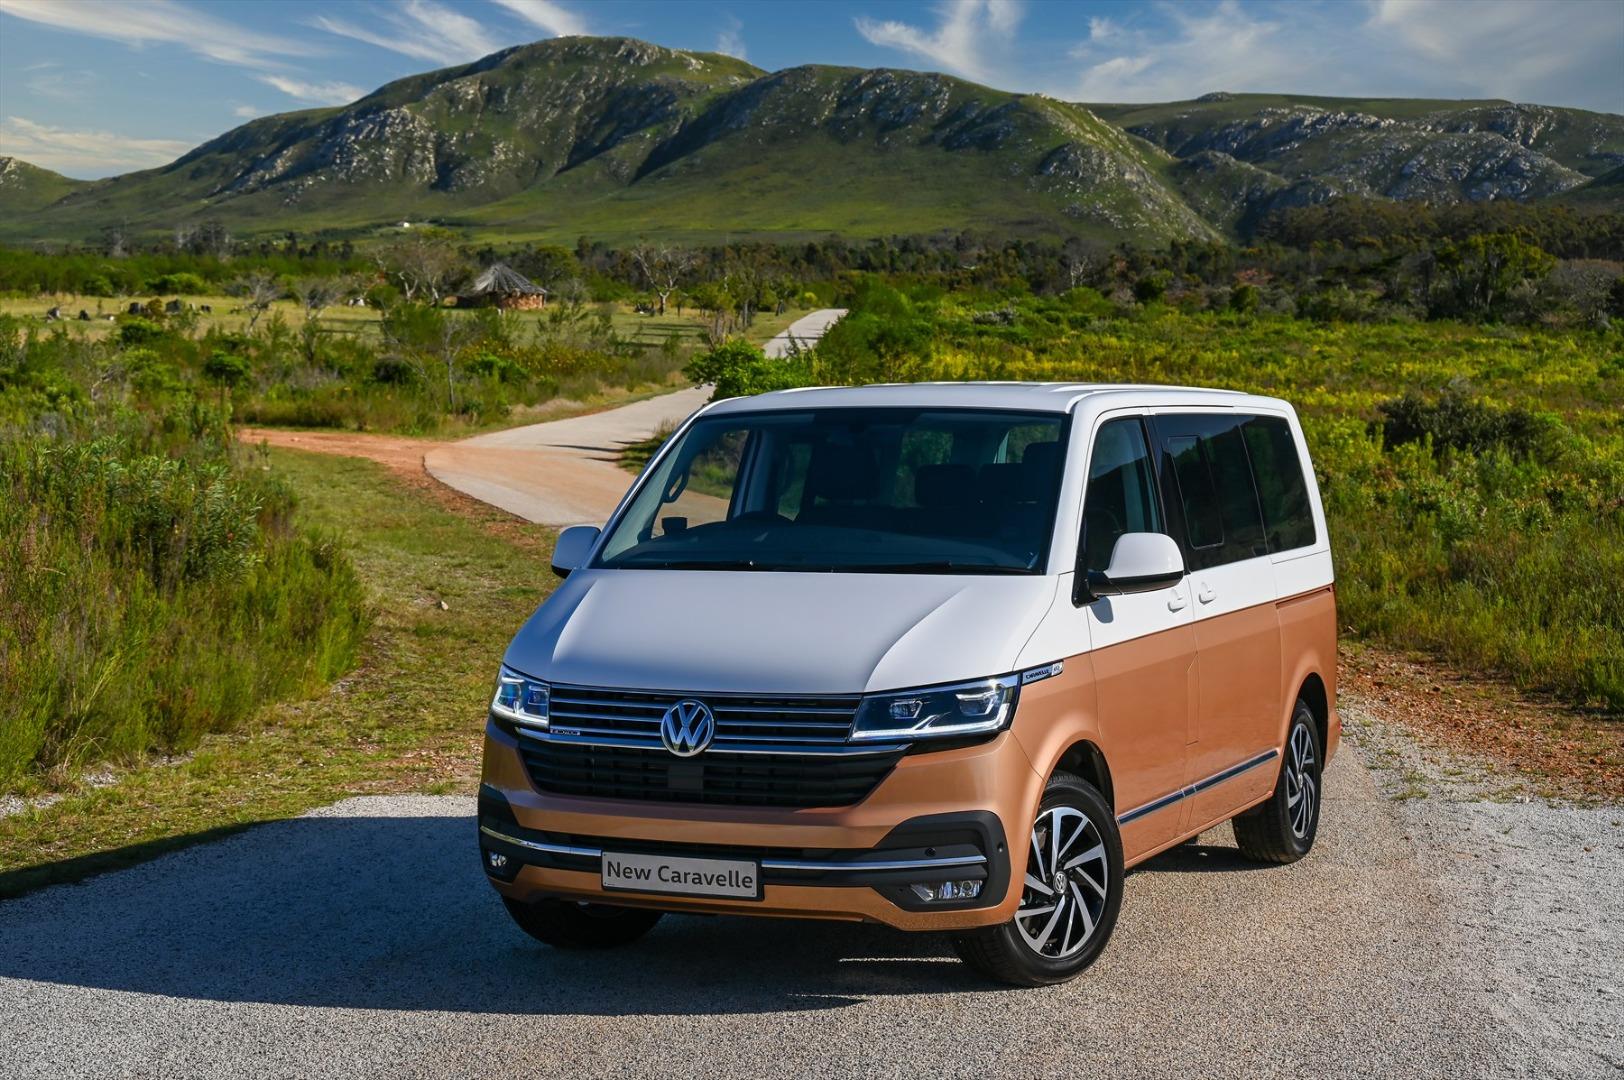 New Volkswagen Caravelle 6.1 test drive Be sure to check